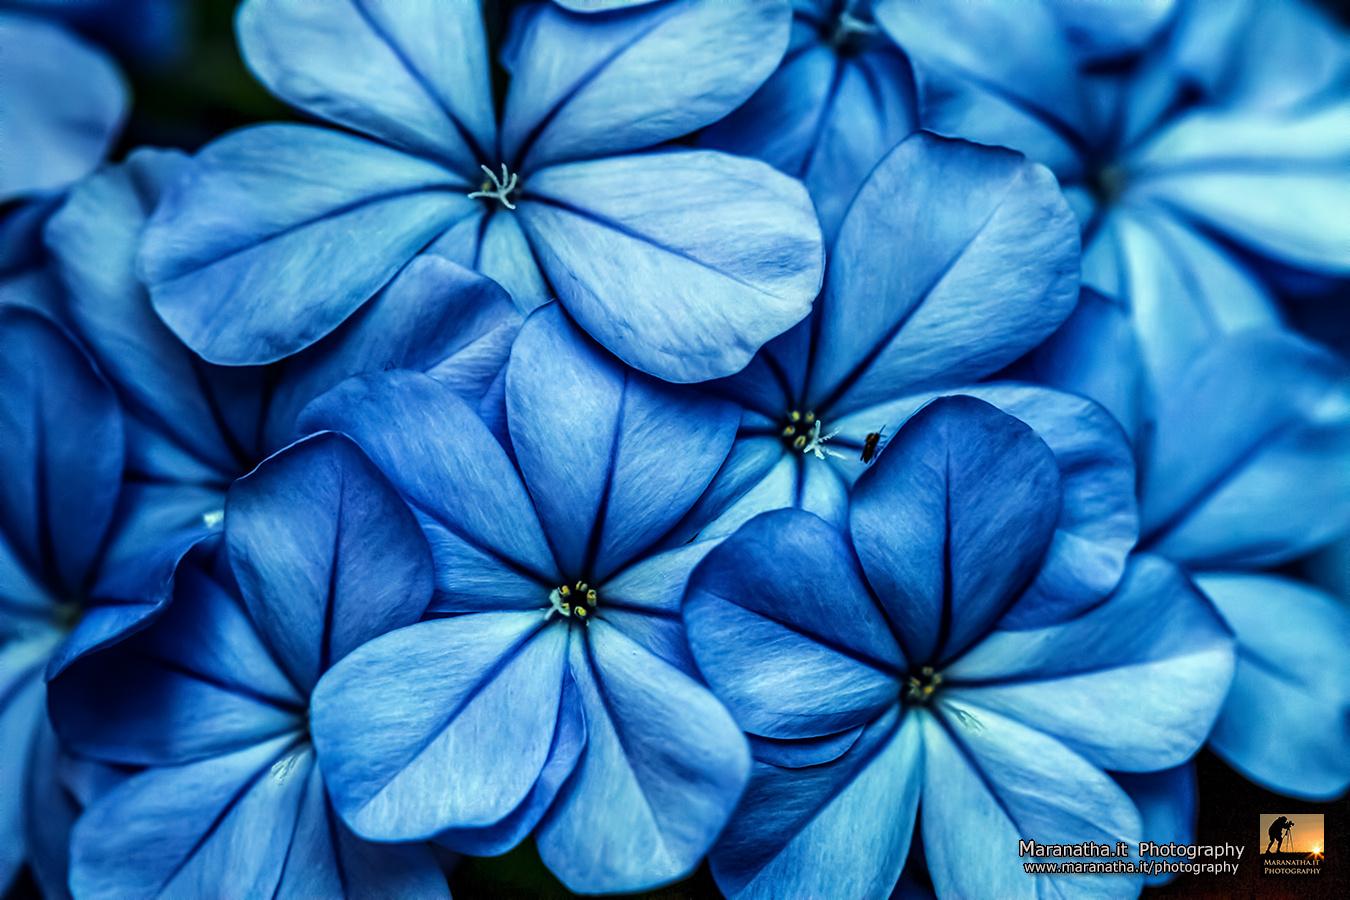 500px Blog 25 Beautiful Patterns, Shapes, & Textures